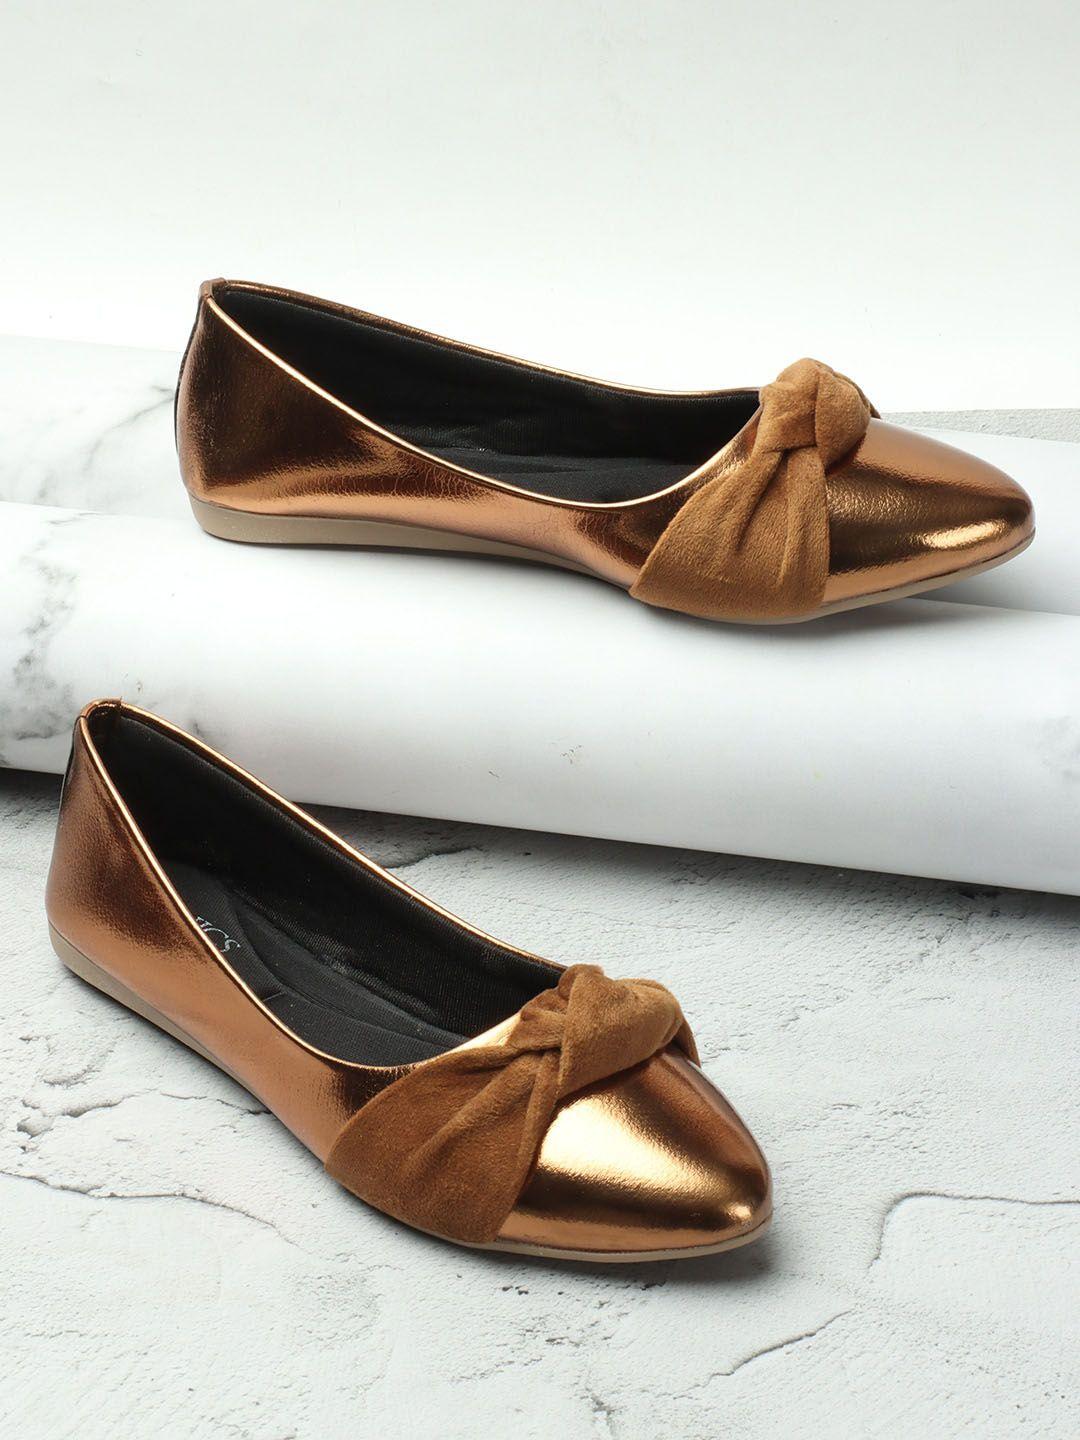 iconics pointed toe ballerinas with bows